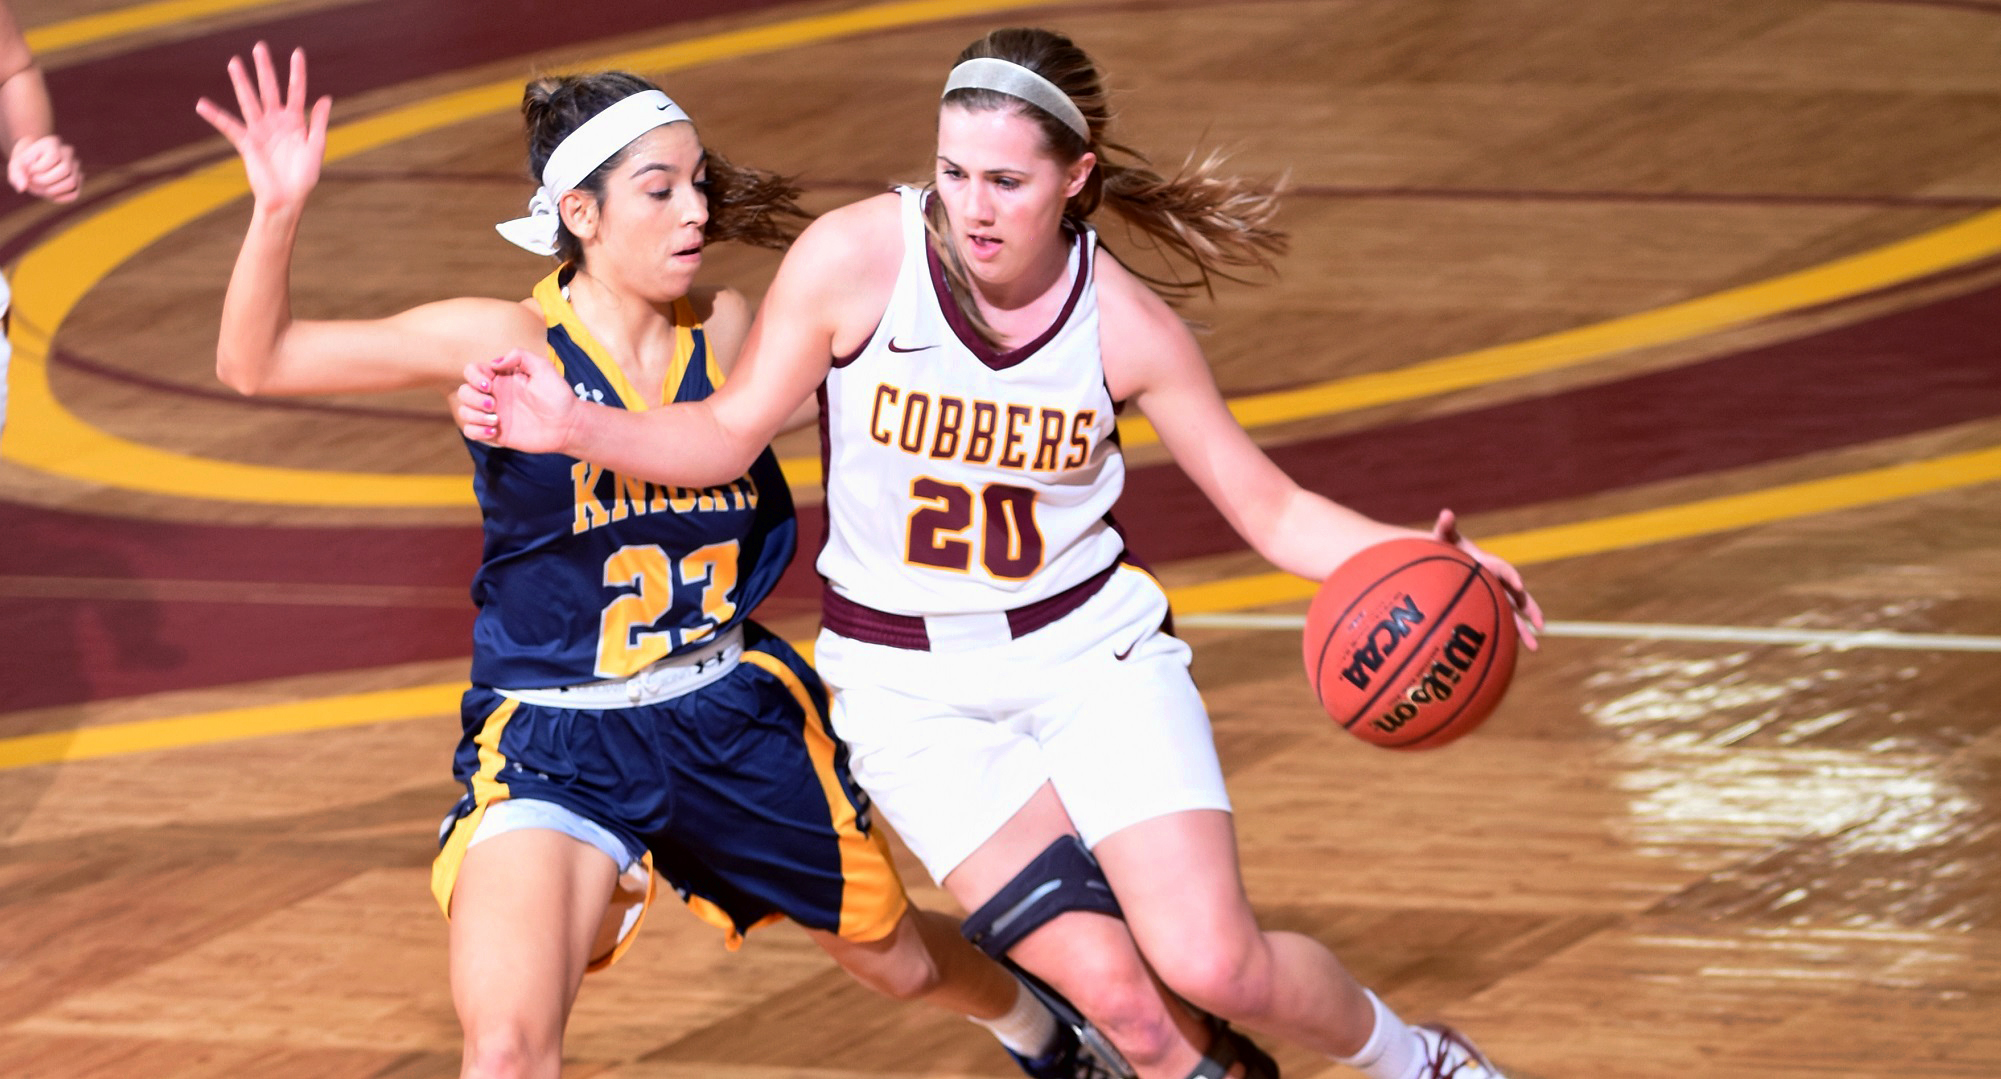 Freshman Emily Beseman drives to the basket during the first half of the Cobbers' win over Carleton. She broke a school record for most 3-point shots made in a single game.